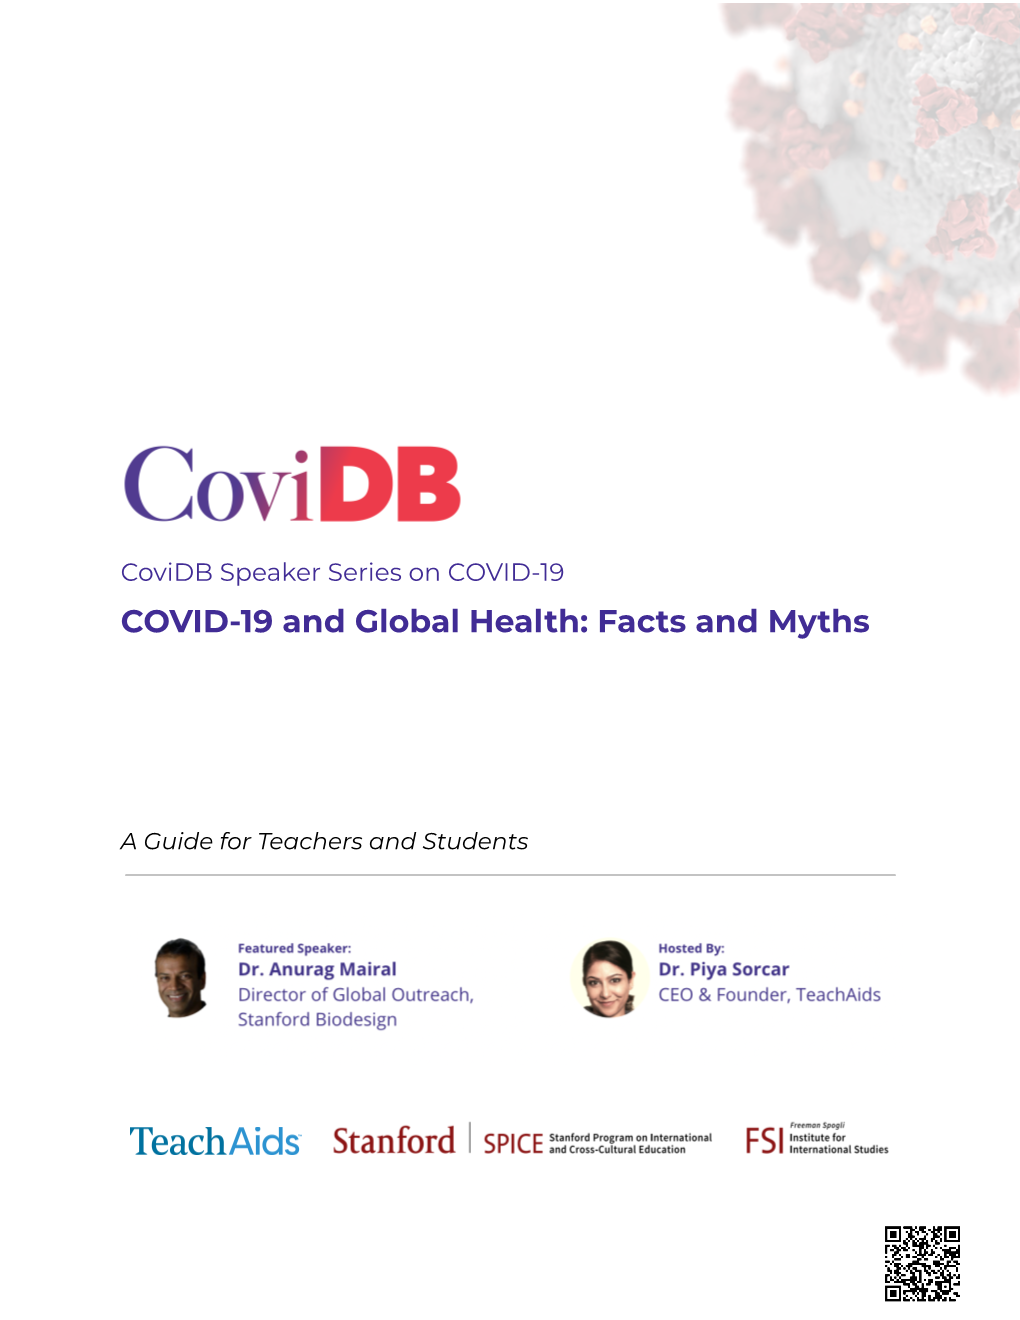 COVID-19 and Global Health: Facts and Myths